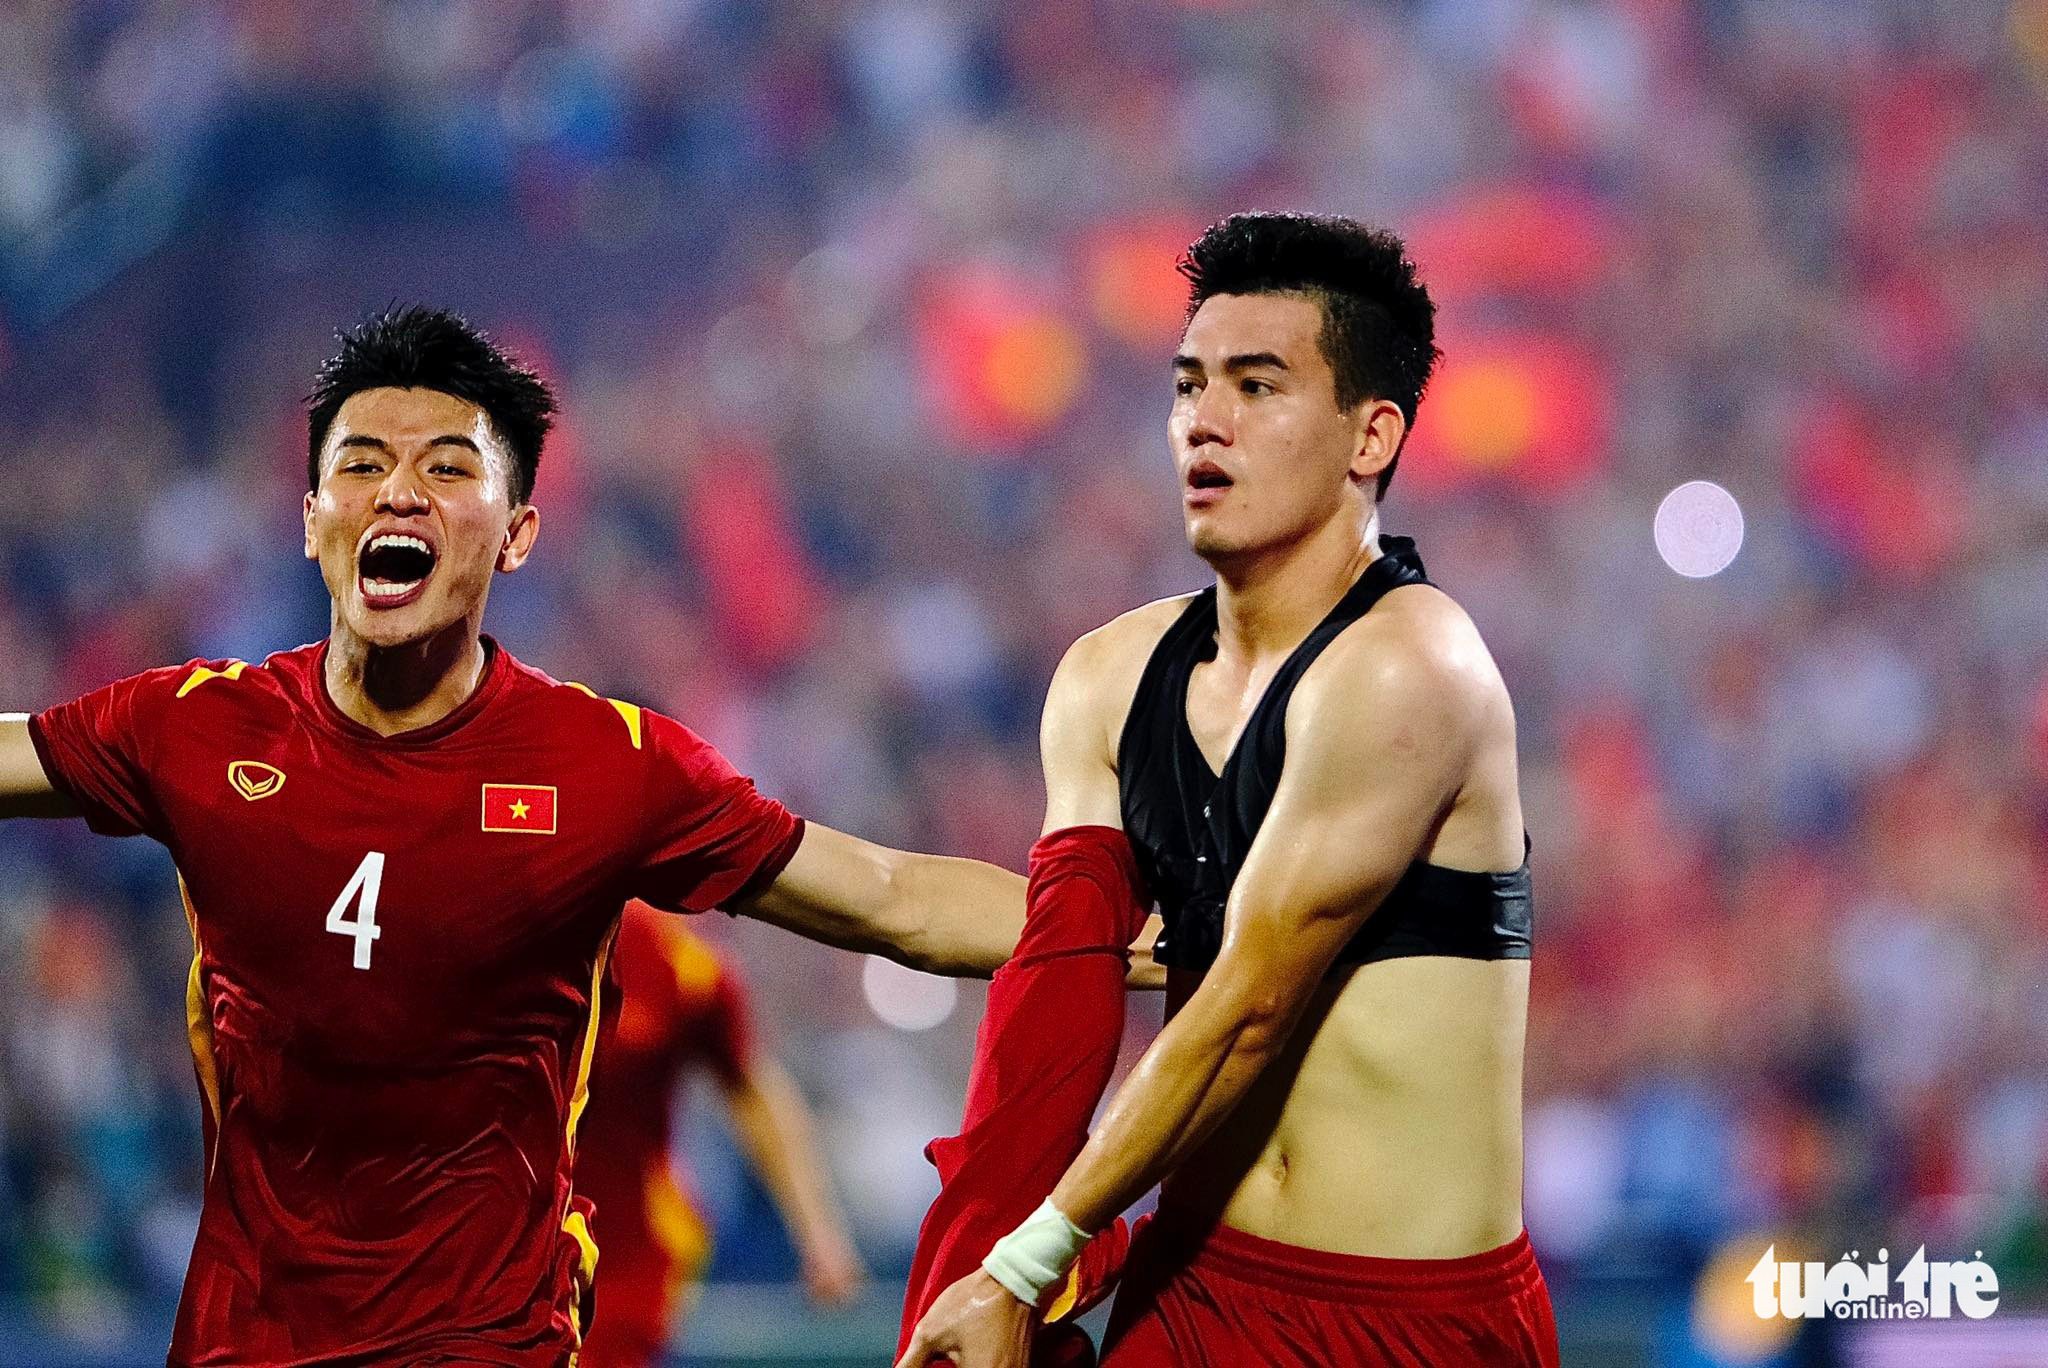 Striker Nguyen Tien Linh takes his jersey off, revealing a GPS-tracking vest, after scoring the winner for Vietnam during the semifinal against Malaysia at the 31st Southeast Asian Games at Viet Tri Stadium in Phu Tho Province, Vietnam, May 19, 2022. Photo: Nam Tran / Tuoi Tre